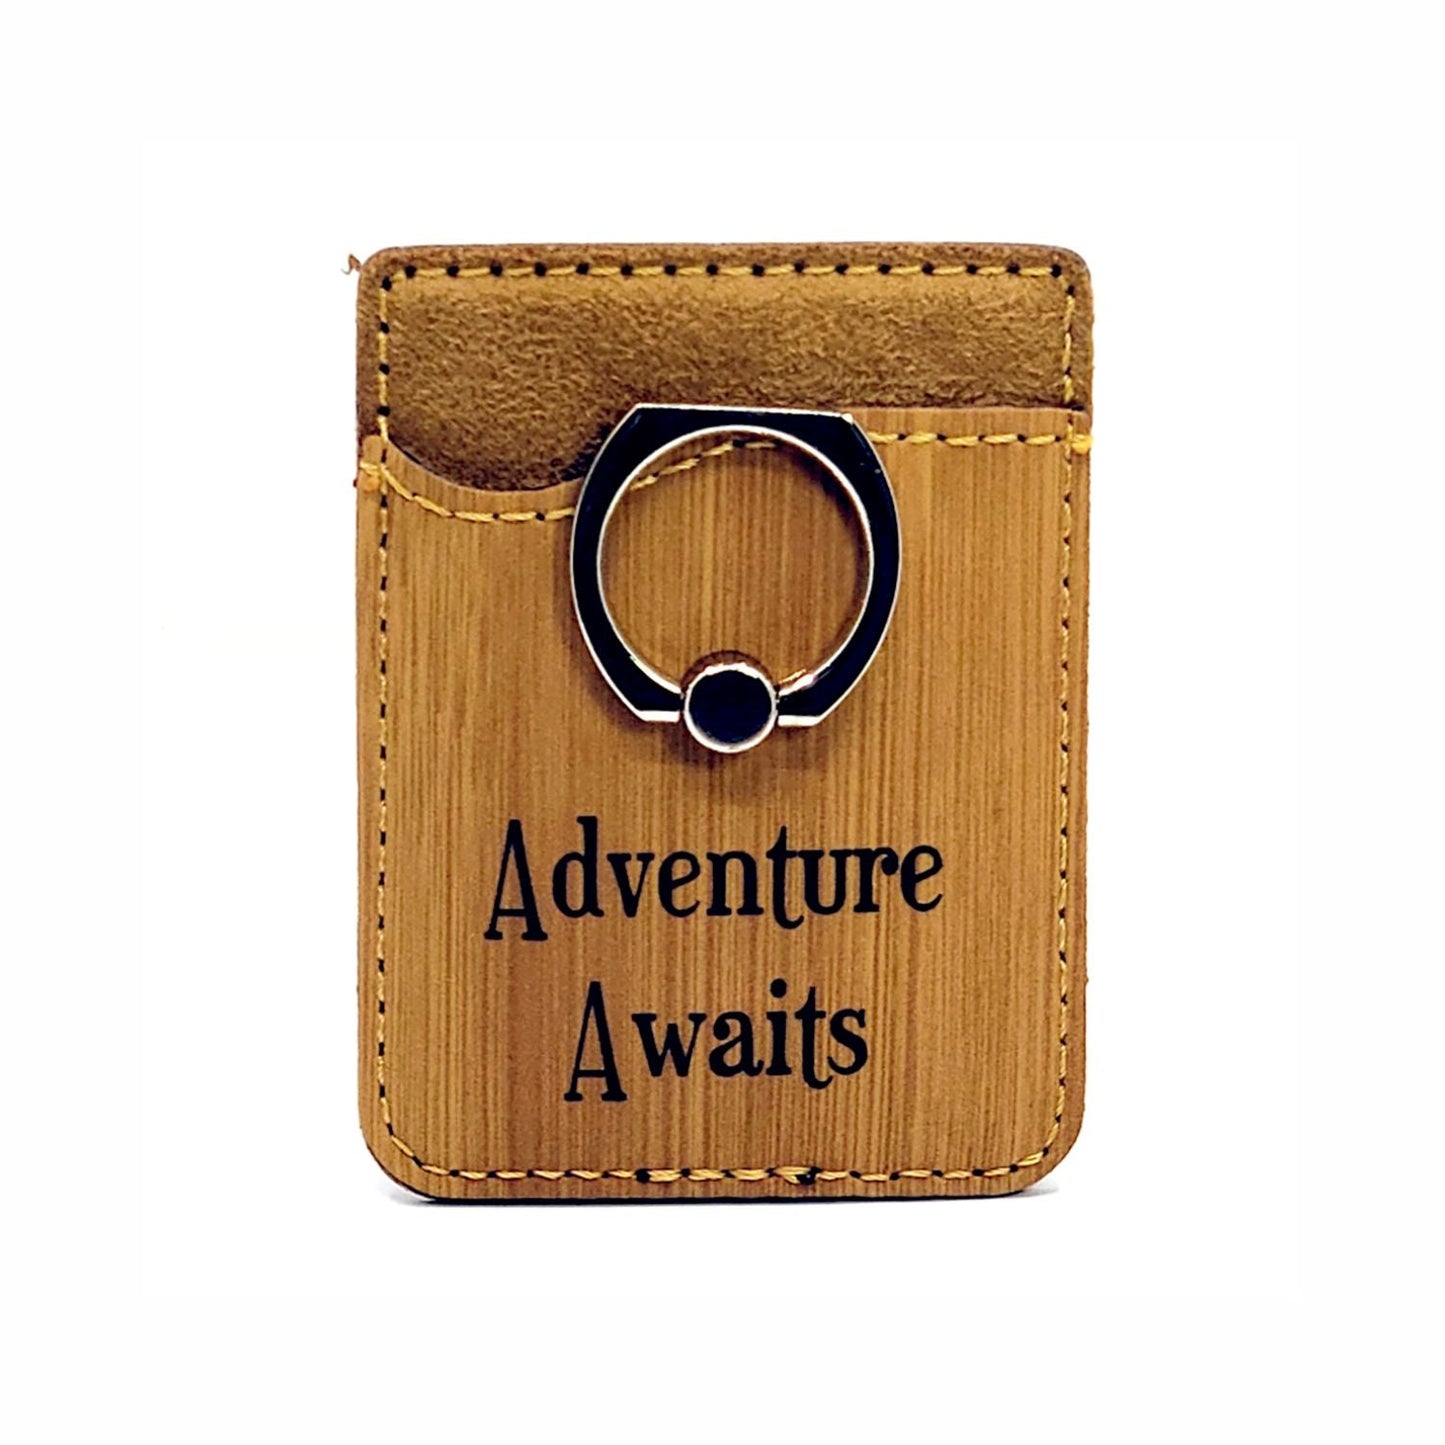 TEE - Leatherette Phone Wallet with Ring - MERCH